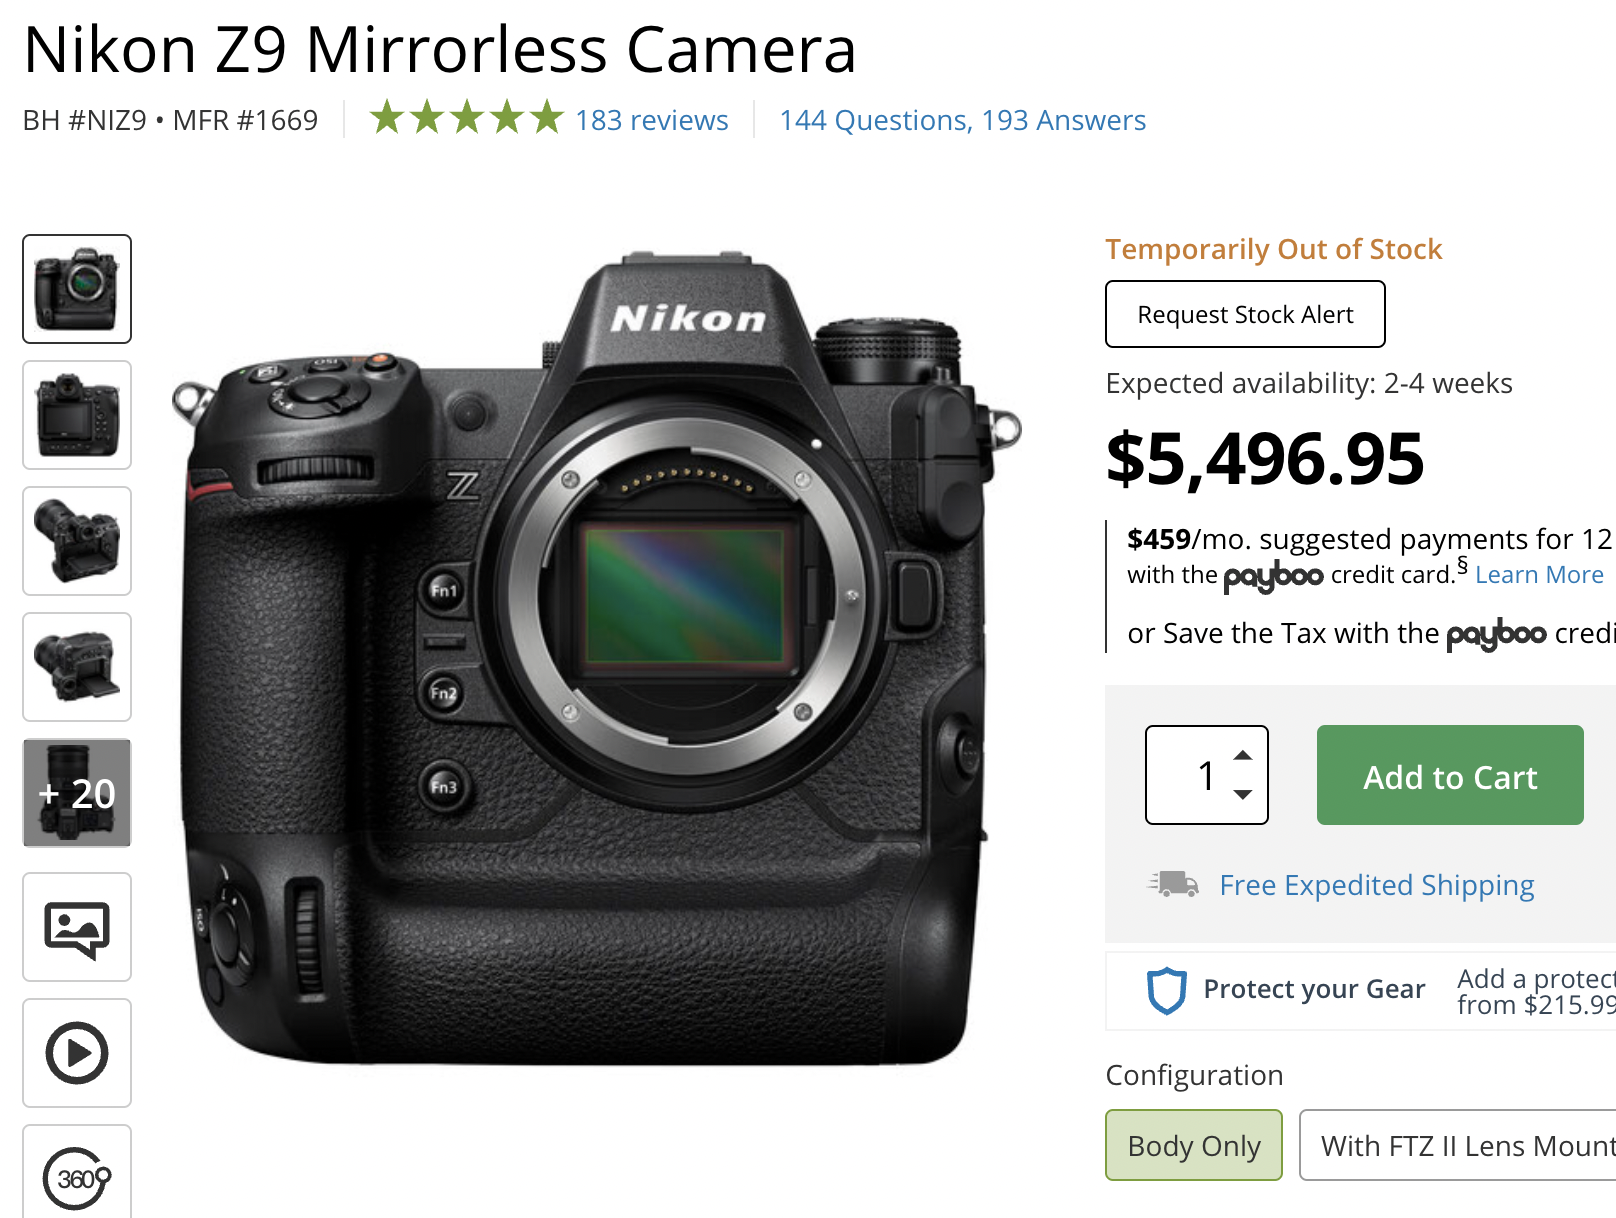 artillery Consider apology Nikon Z9 now In Stock at B&H Photo Video within 2-4 Weeks | Nikon Rumors CO